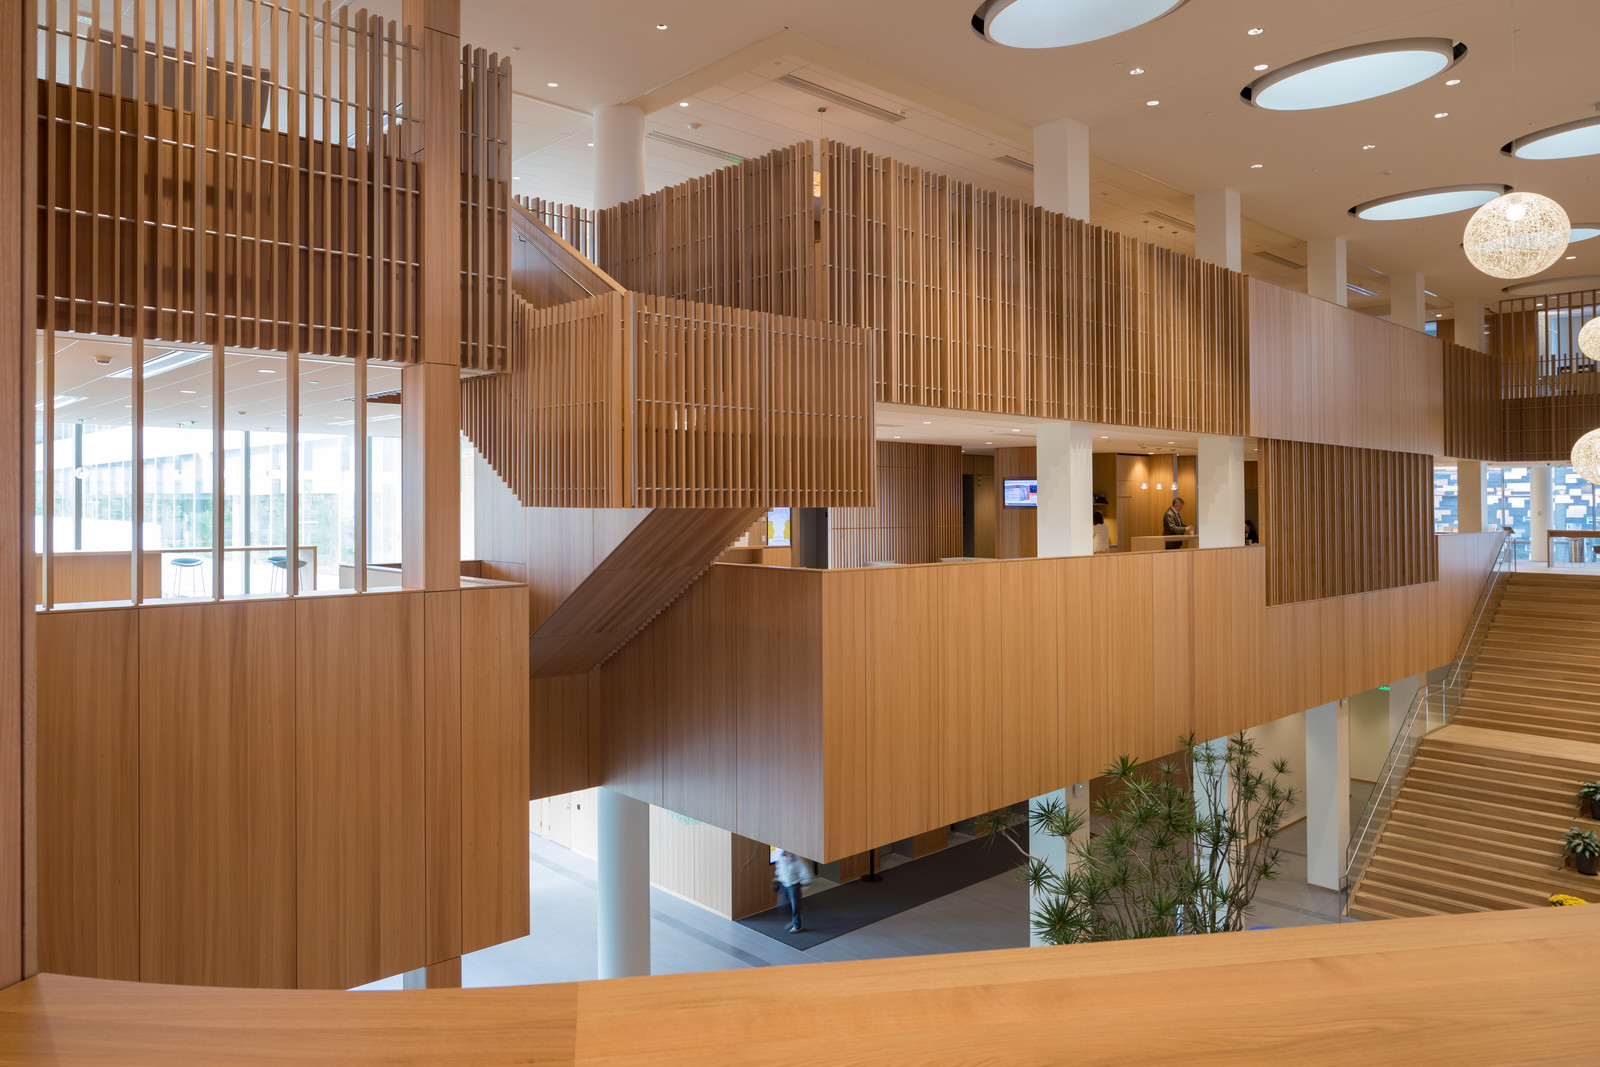 This is a unique shot of the three-story atrium slat guardrail system of made up of quartered elm. The client's use of wood wherever possible makes this award winning space one of the most beautiful corporate headquarters we have ever worked on.